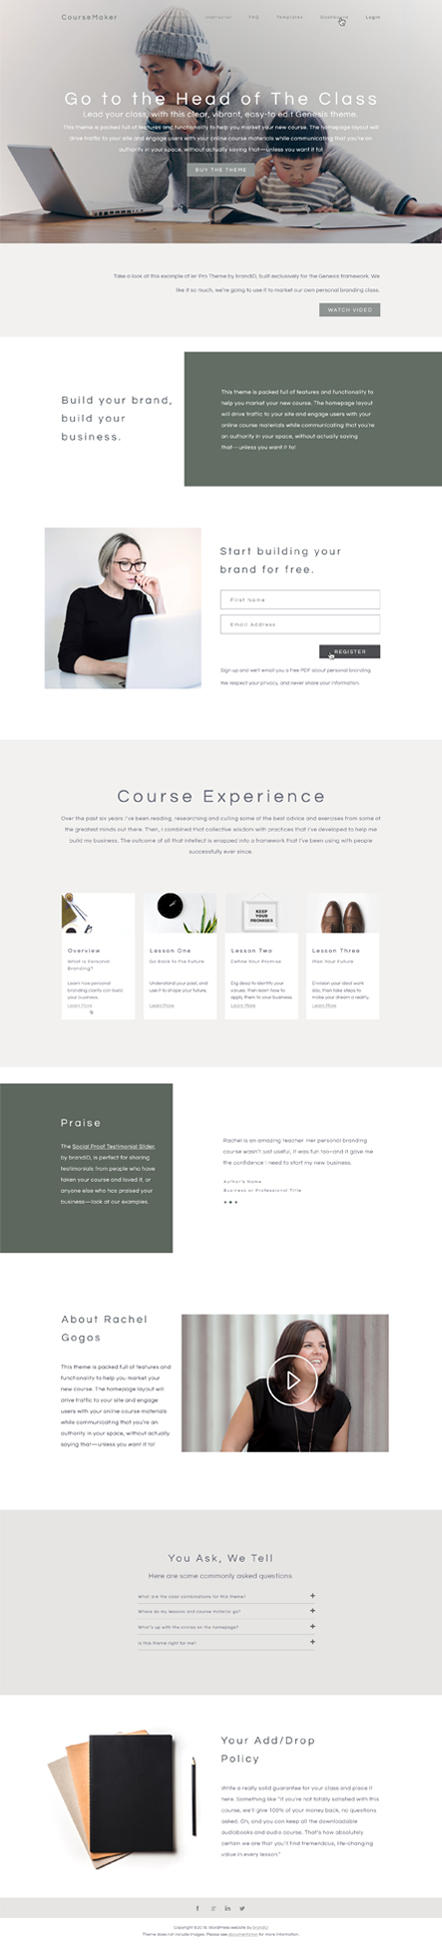 Course Maker Pro WordPress Theme LearnDash and Lifter LMS